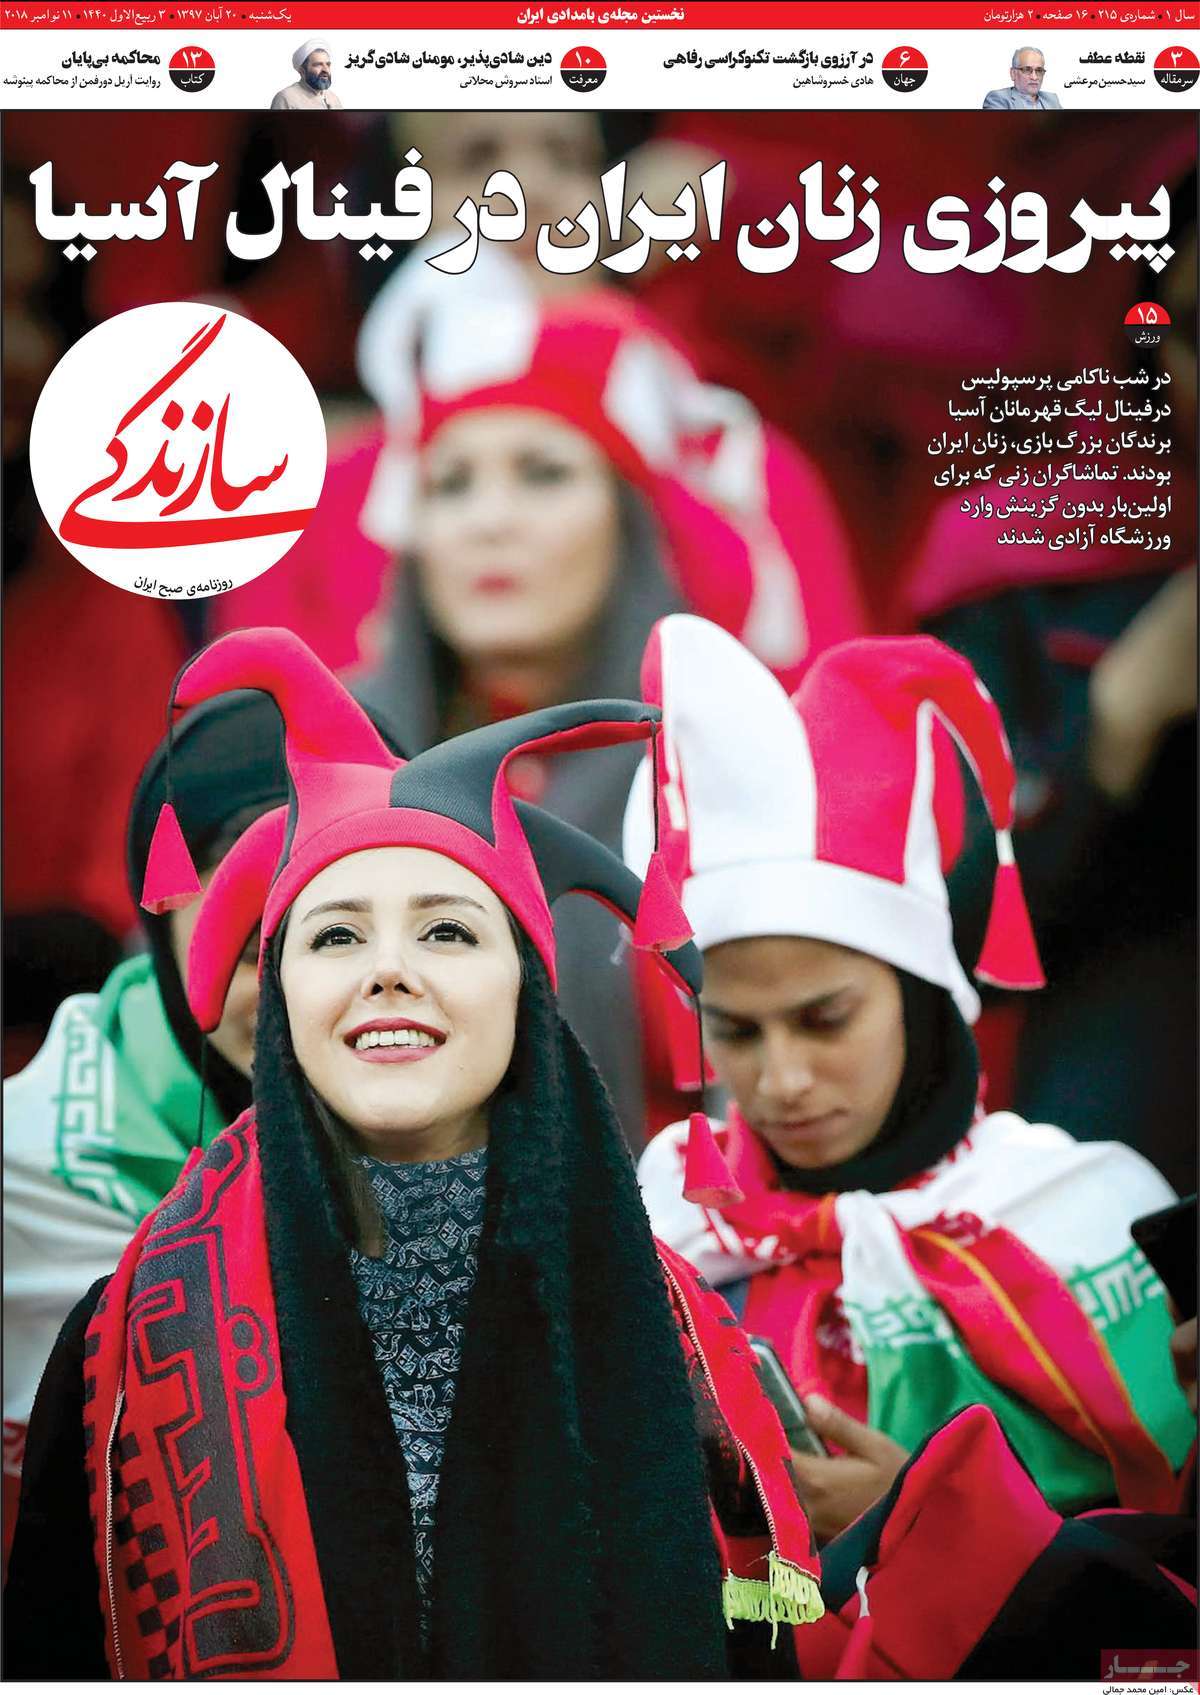 A Look at Iranian Newspaper Front Pages on November 11